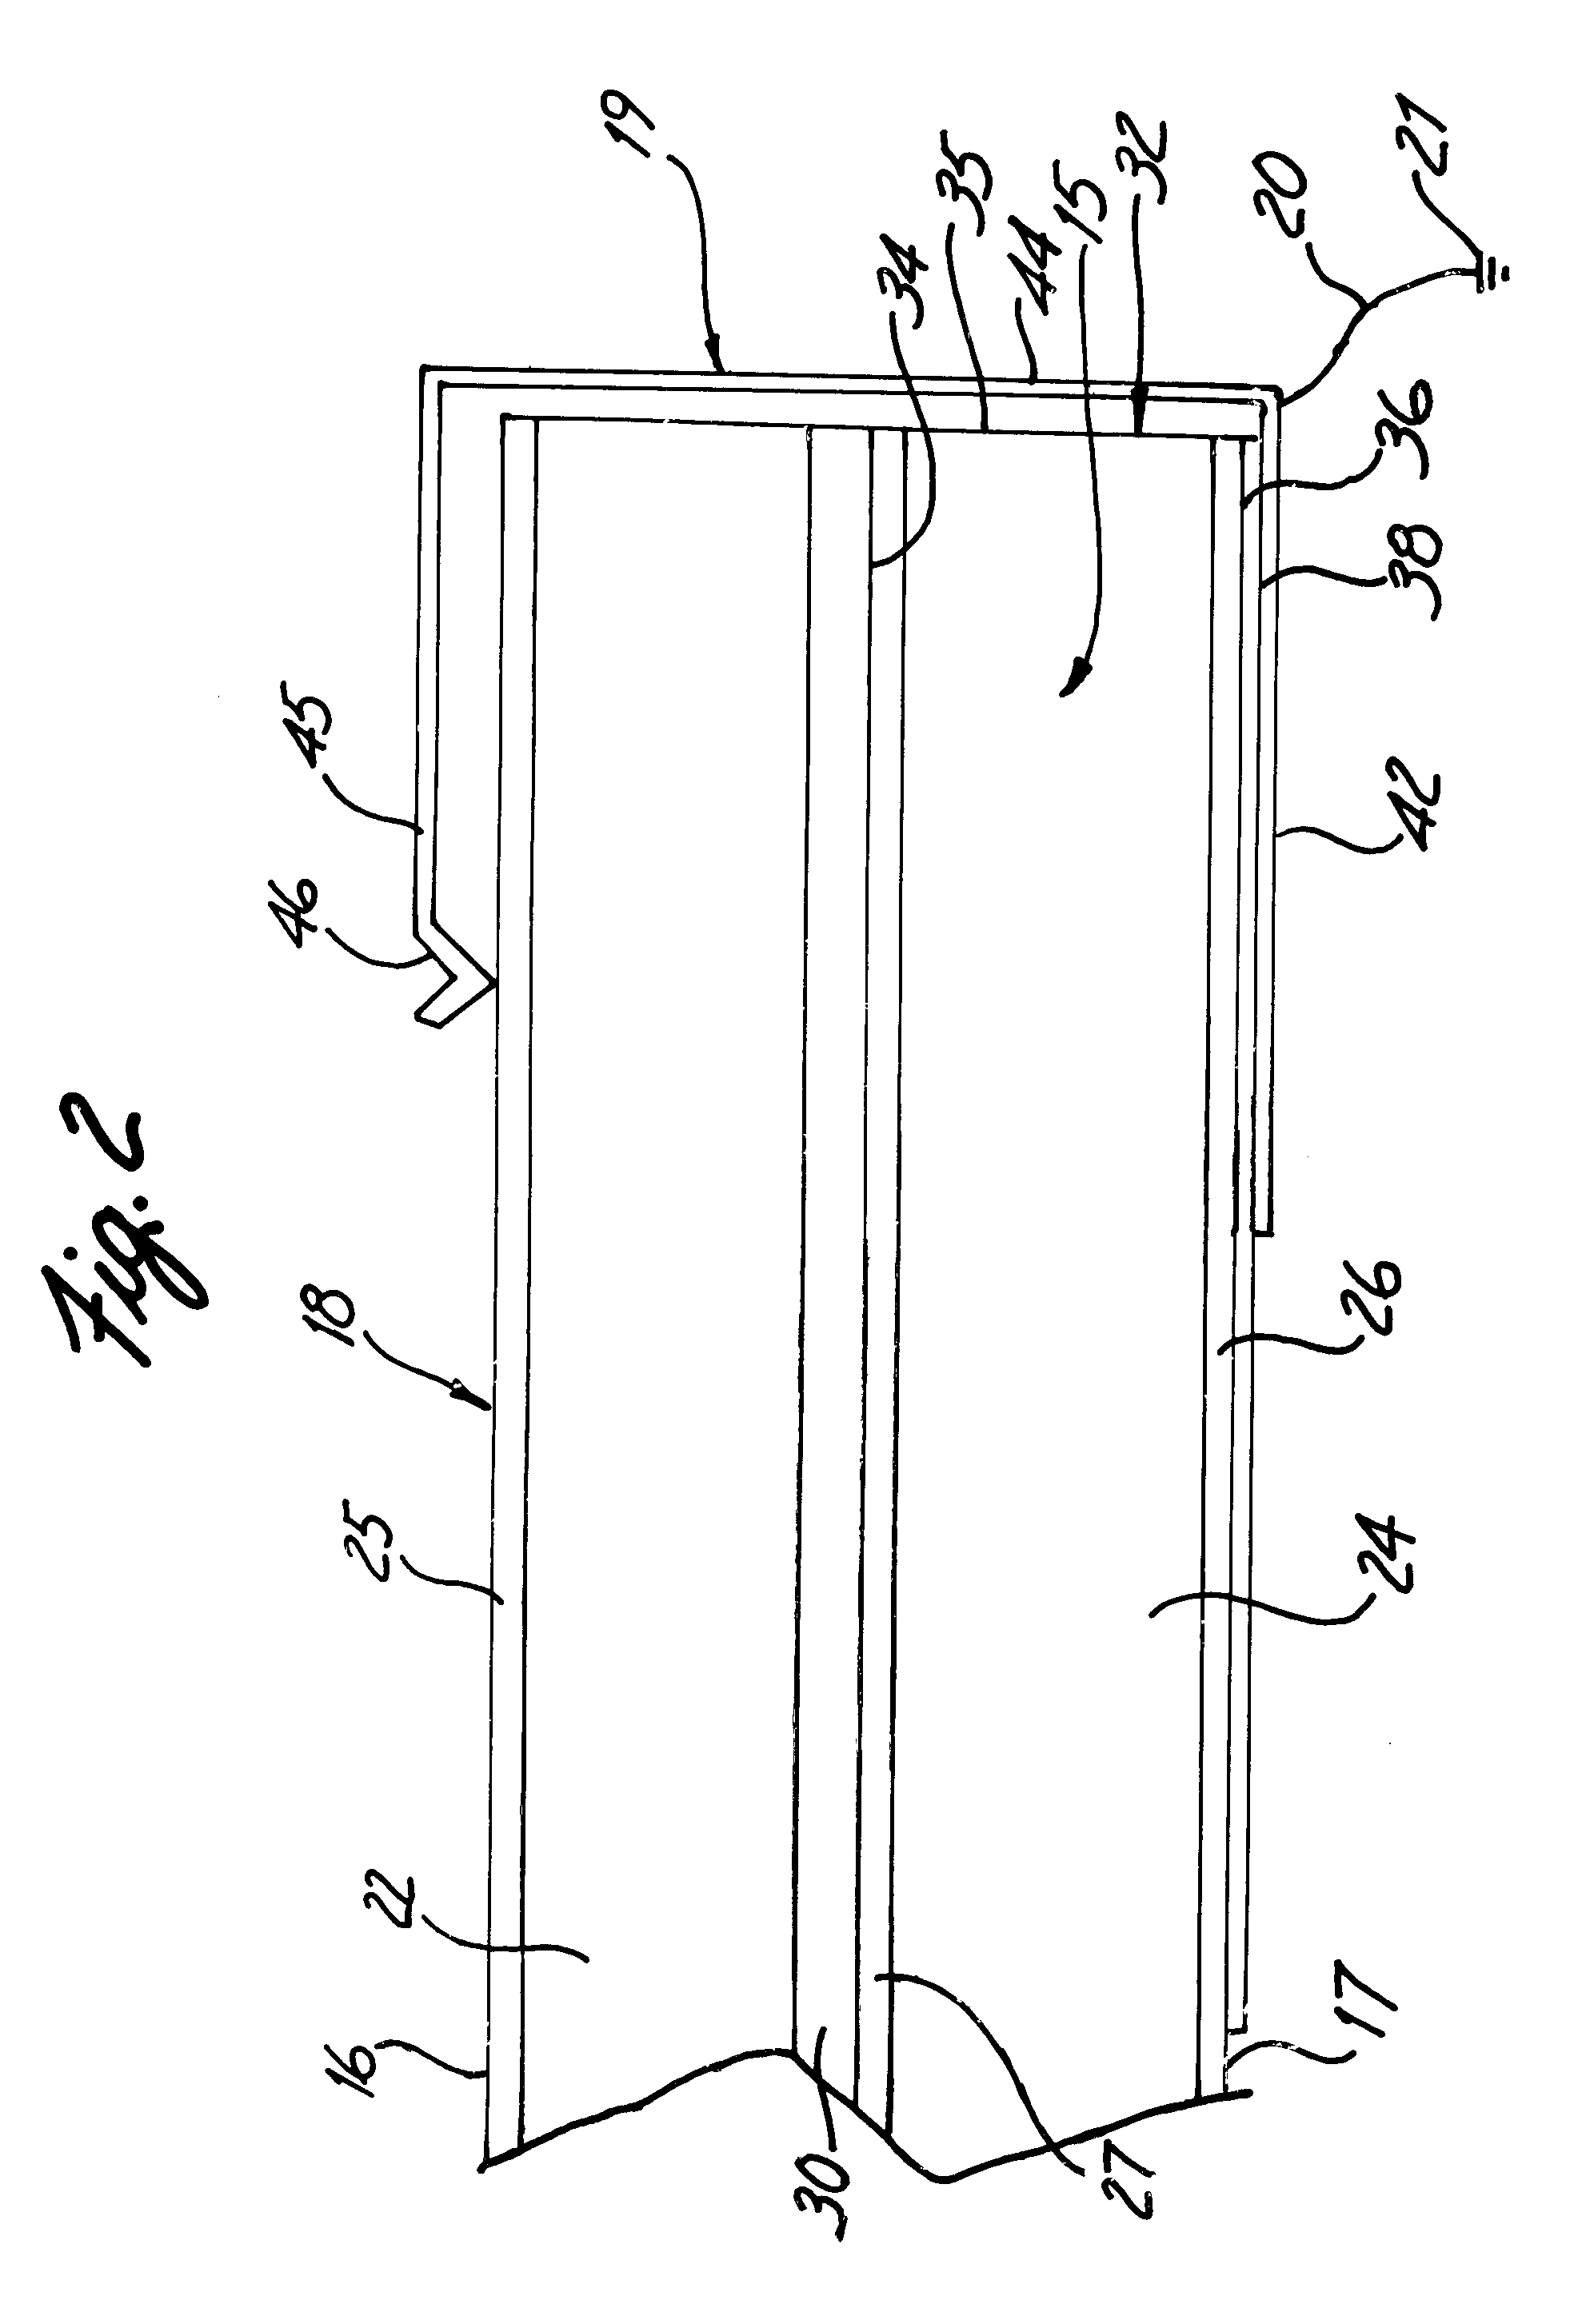 Display panel filter connection to a display panel